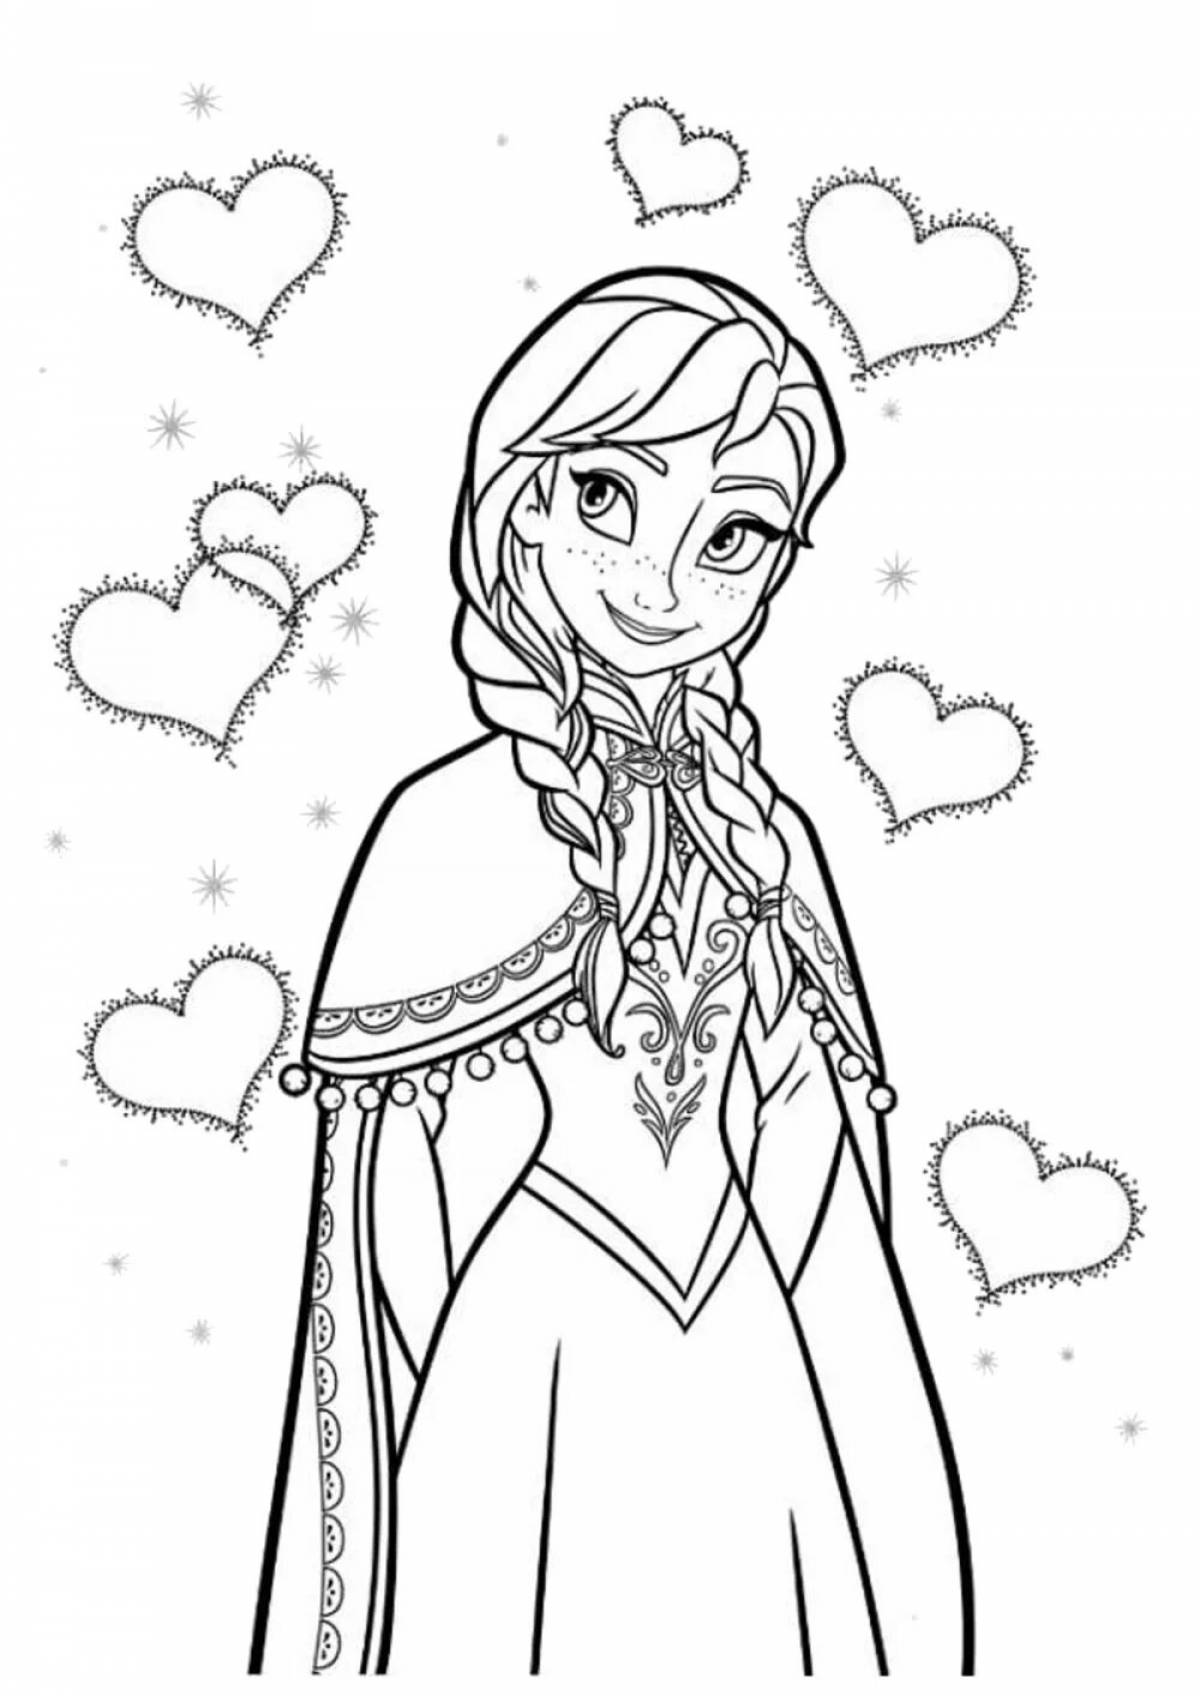 Exciting coloring page 2 for girls